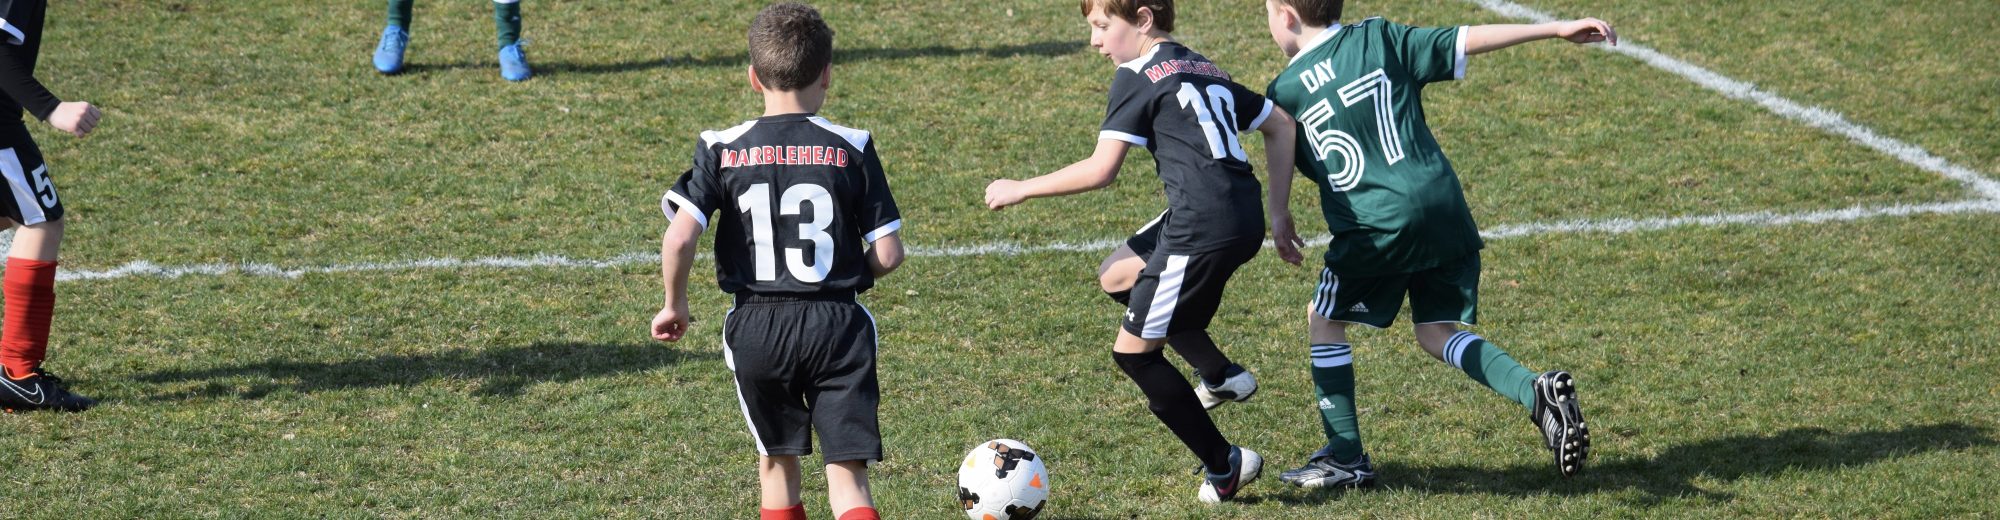 Marblehead Youth Soccer Association